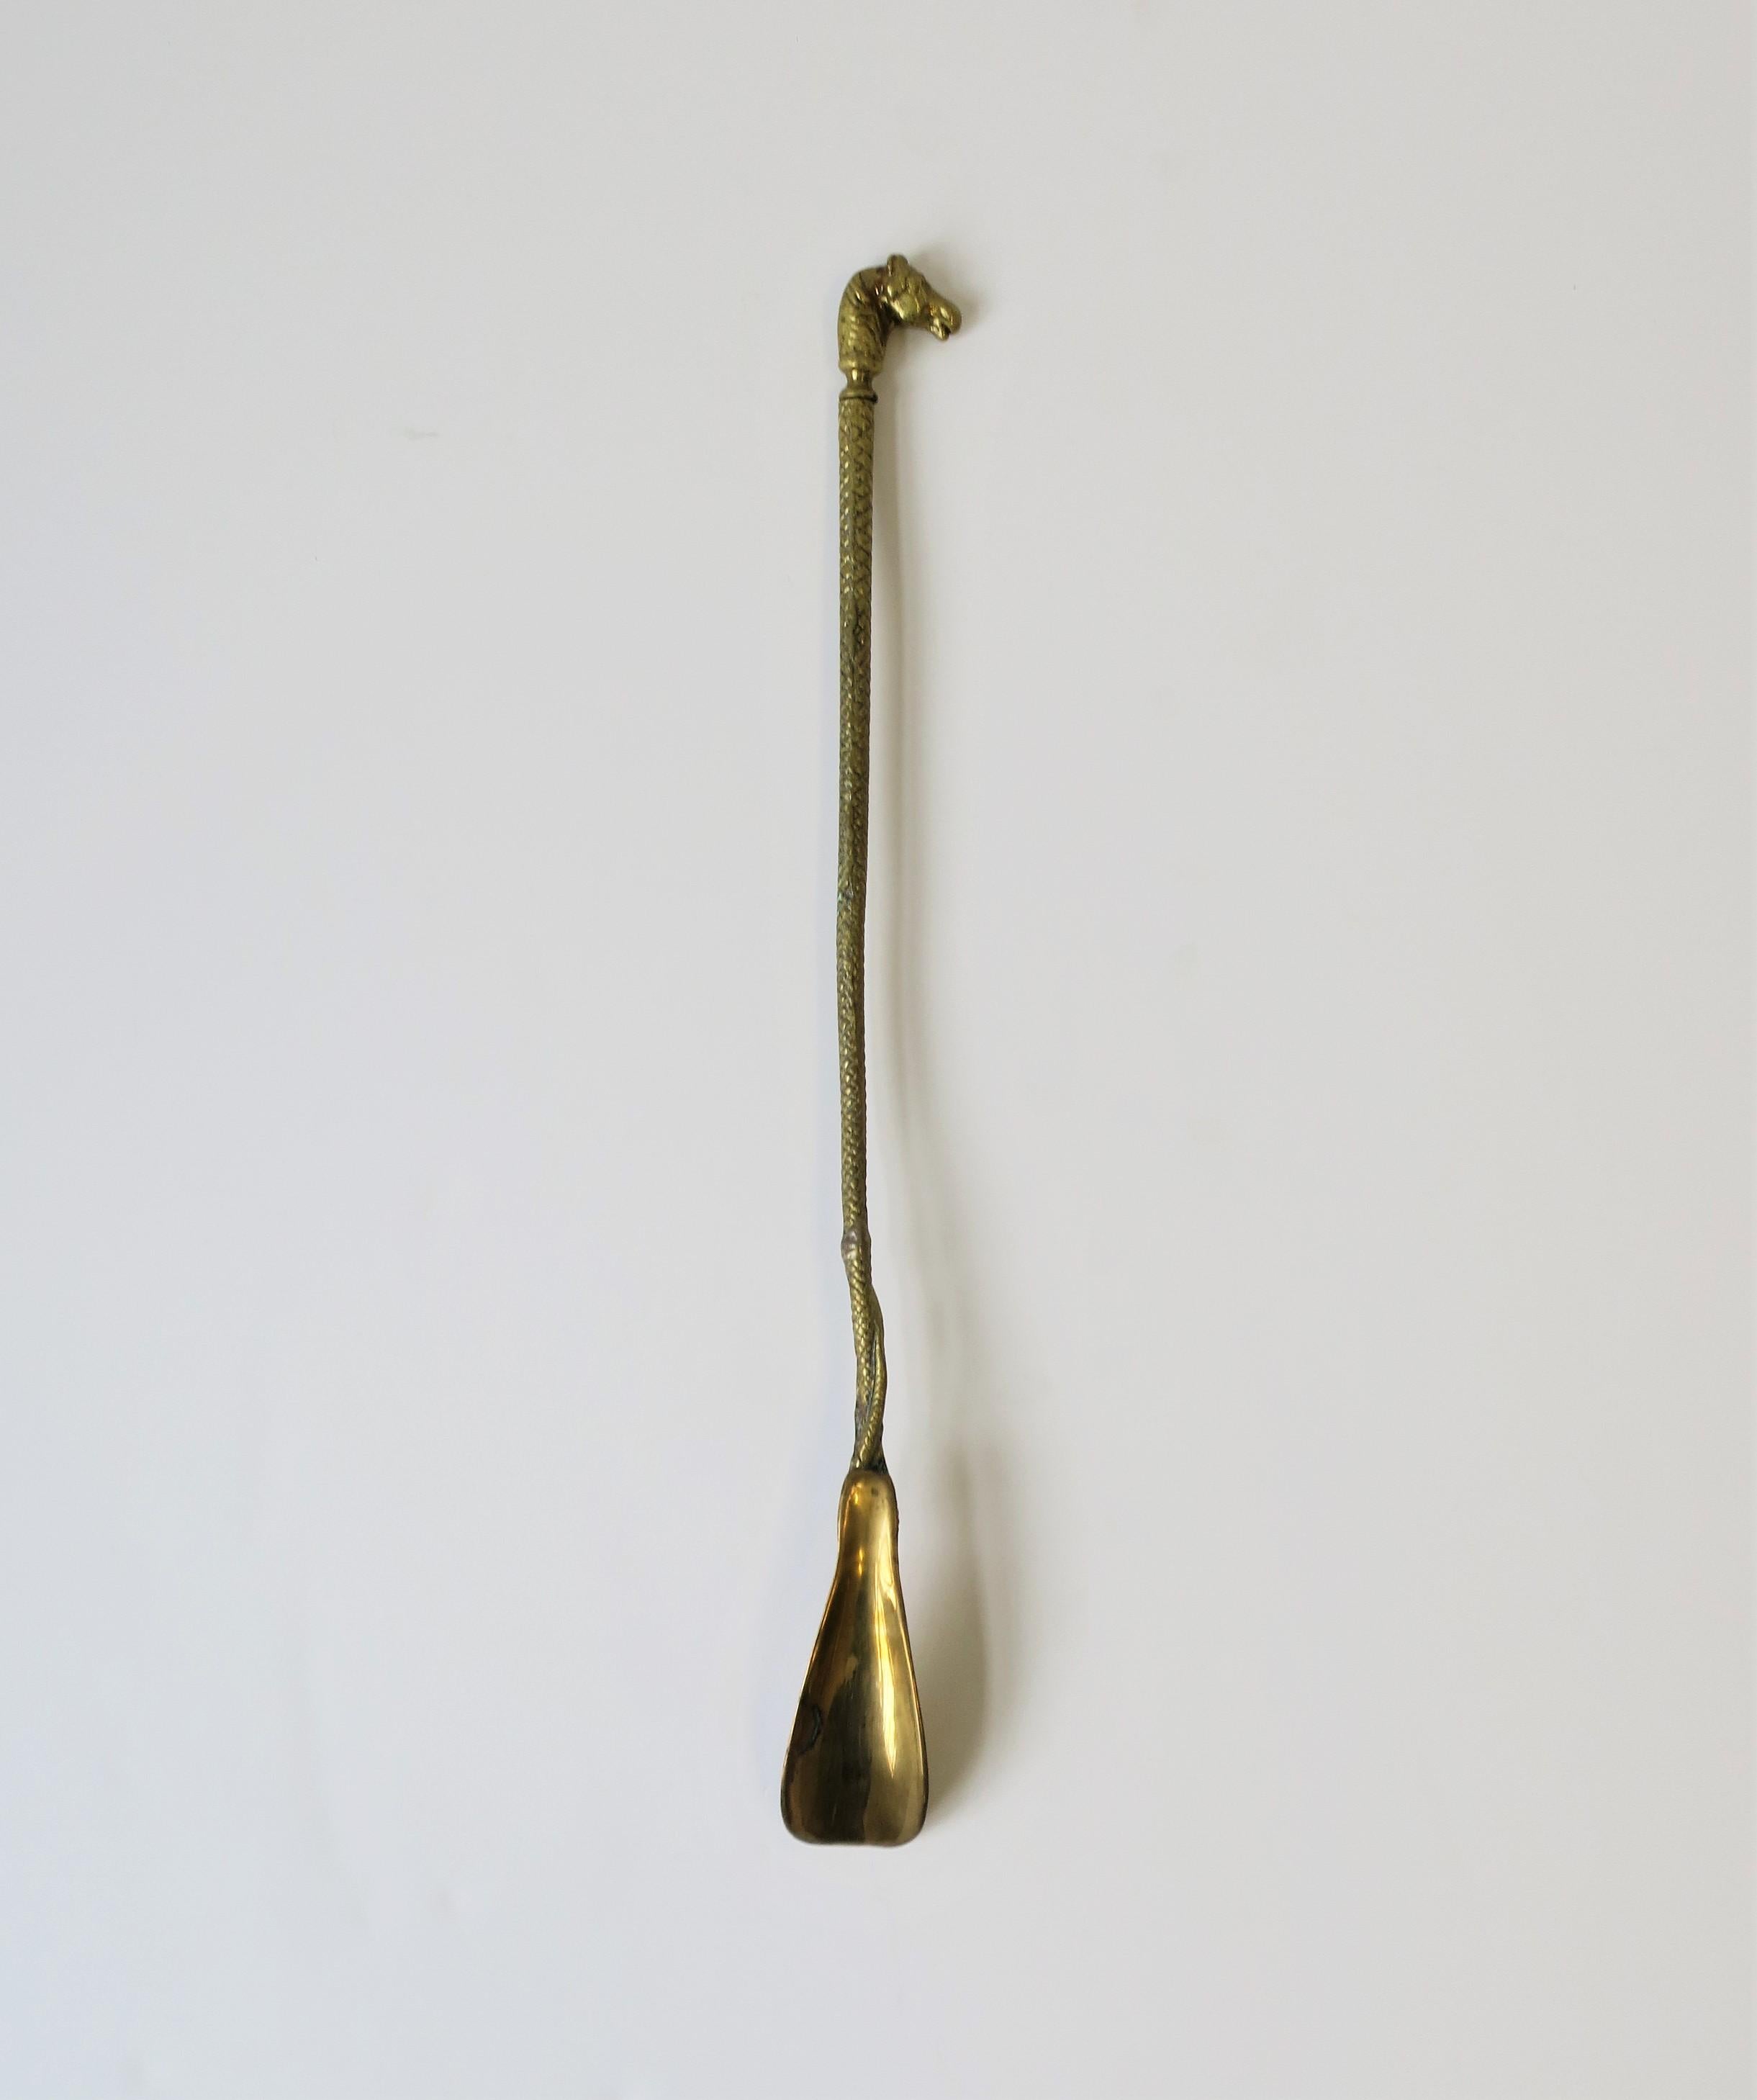 A solid brass vintage shoe horn with horse head and serpent snake design, in the style of Gucci or Hermes, circa 20th century. Equine horse head at top, serpent snake design textured handle with snake head at base near 'horn'. Dimensions: 18